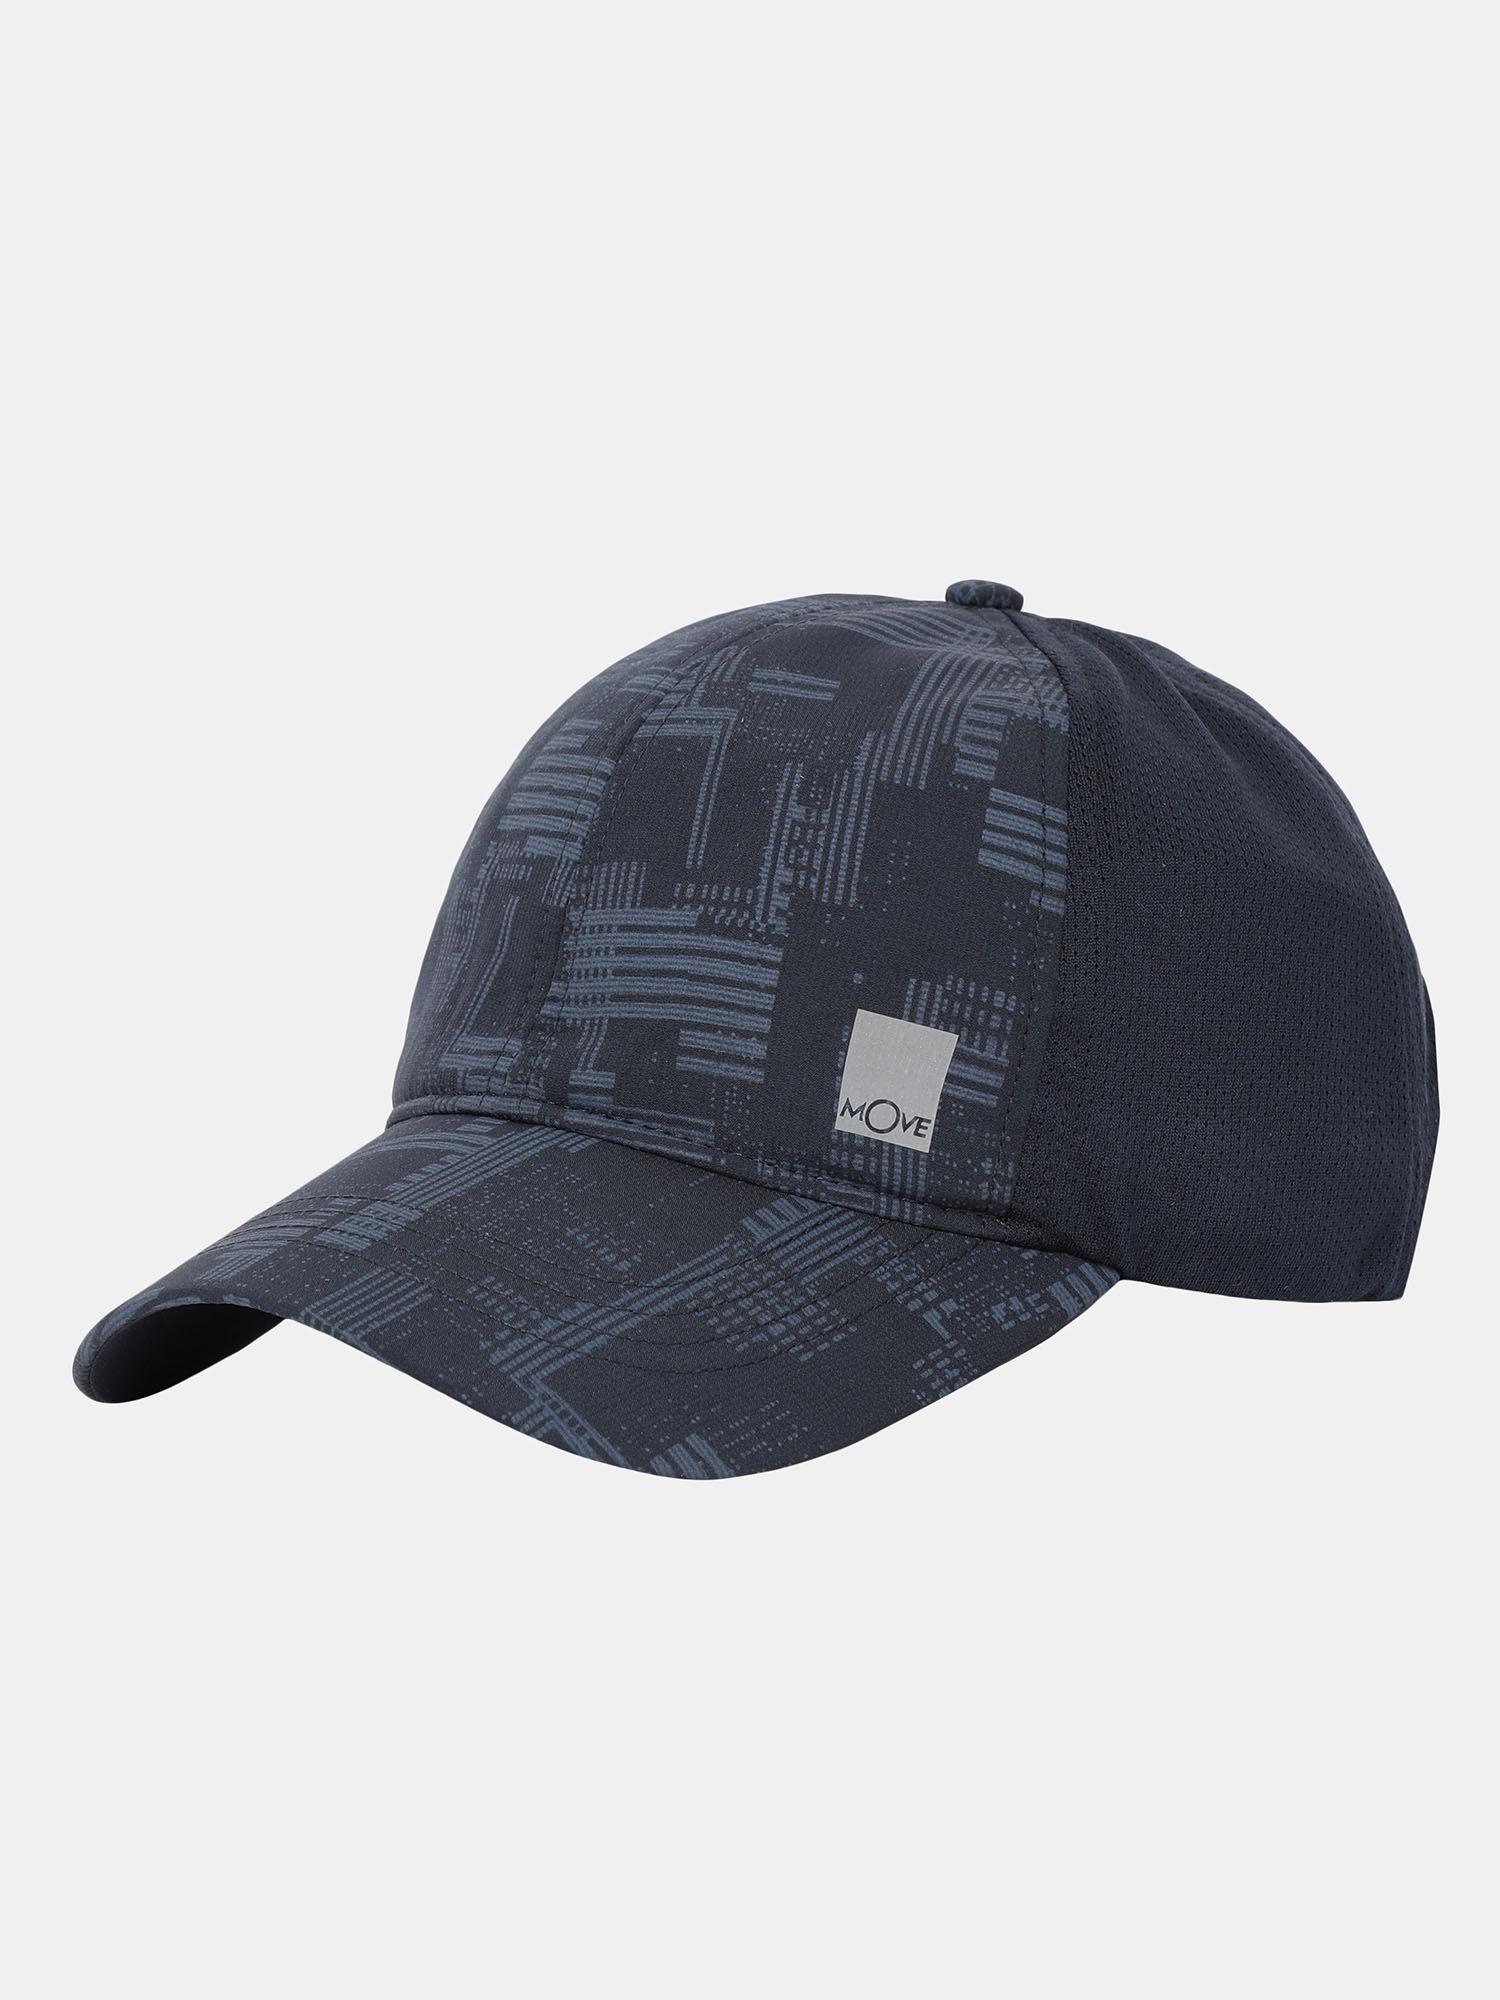 cp23-polyester-printed-cap-with-adjustable-back-closure-and-stay-dry-navy